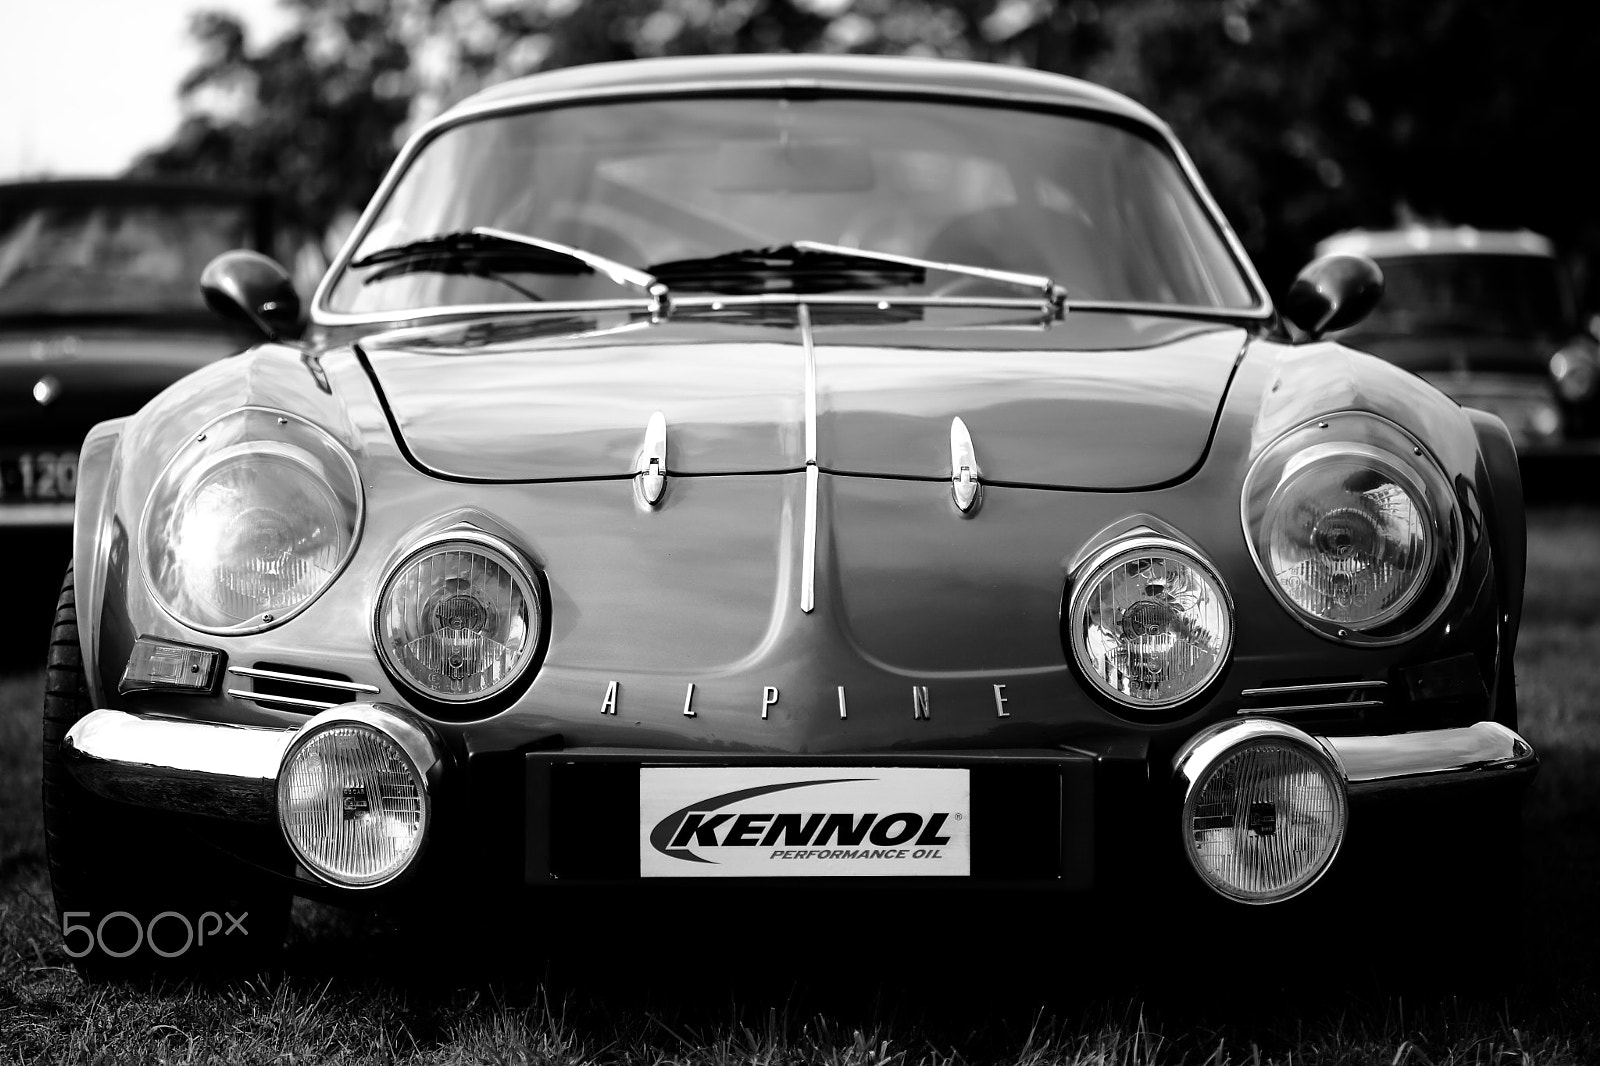 Canon EOS 5D Mark II sample photo. Alpine a110 in black and white photography